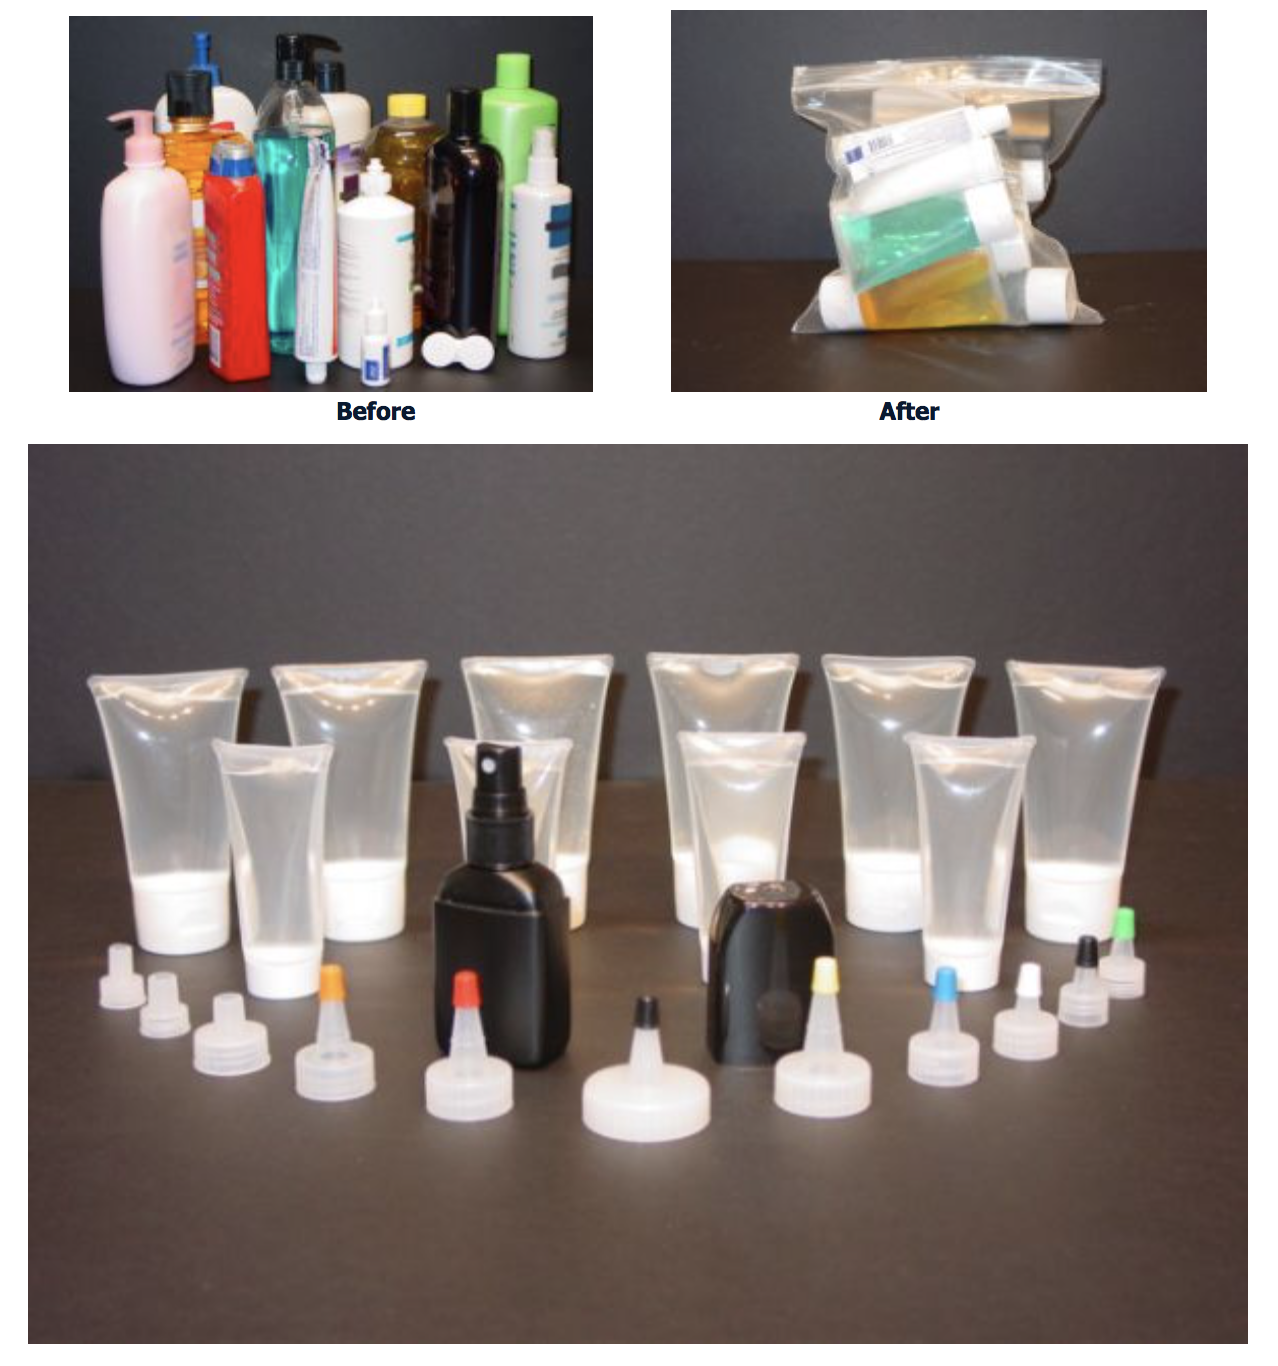 Cruise Plastic Flask Kit Runners Rum Alcohol Liquor Smuggle Booze Bags Travel for sale online 